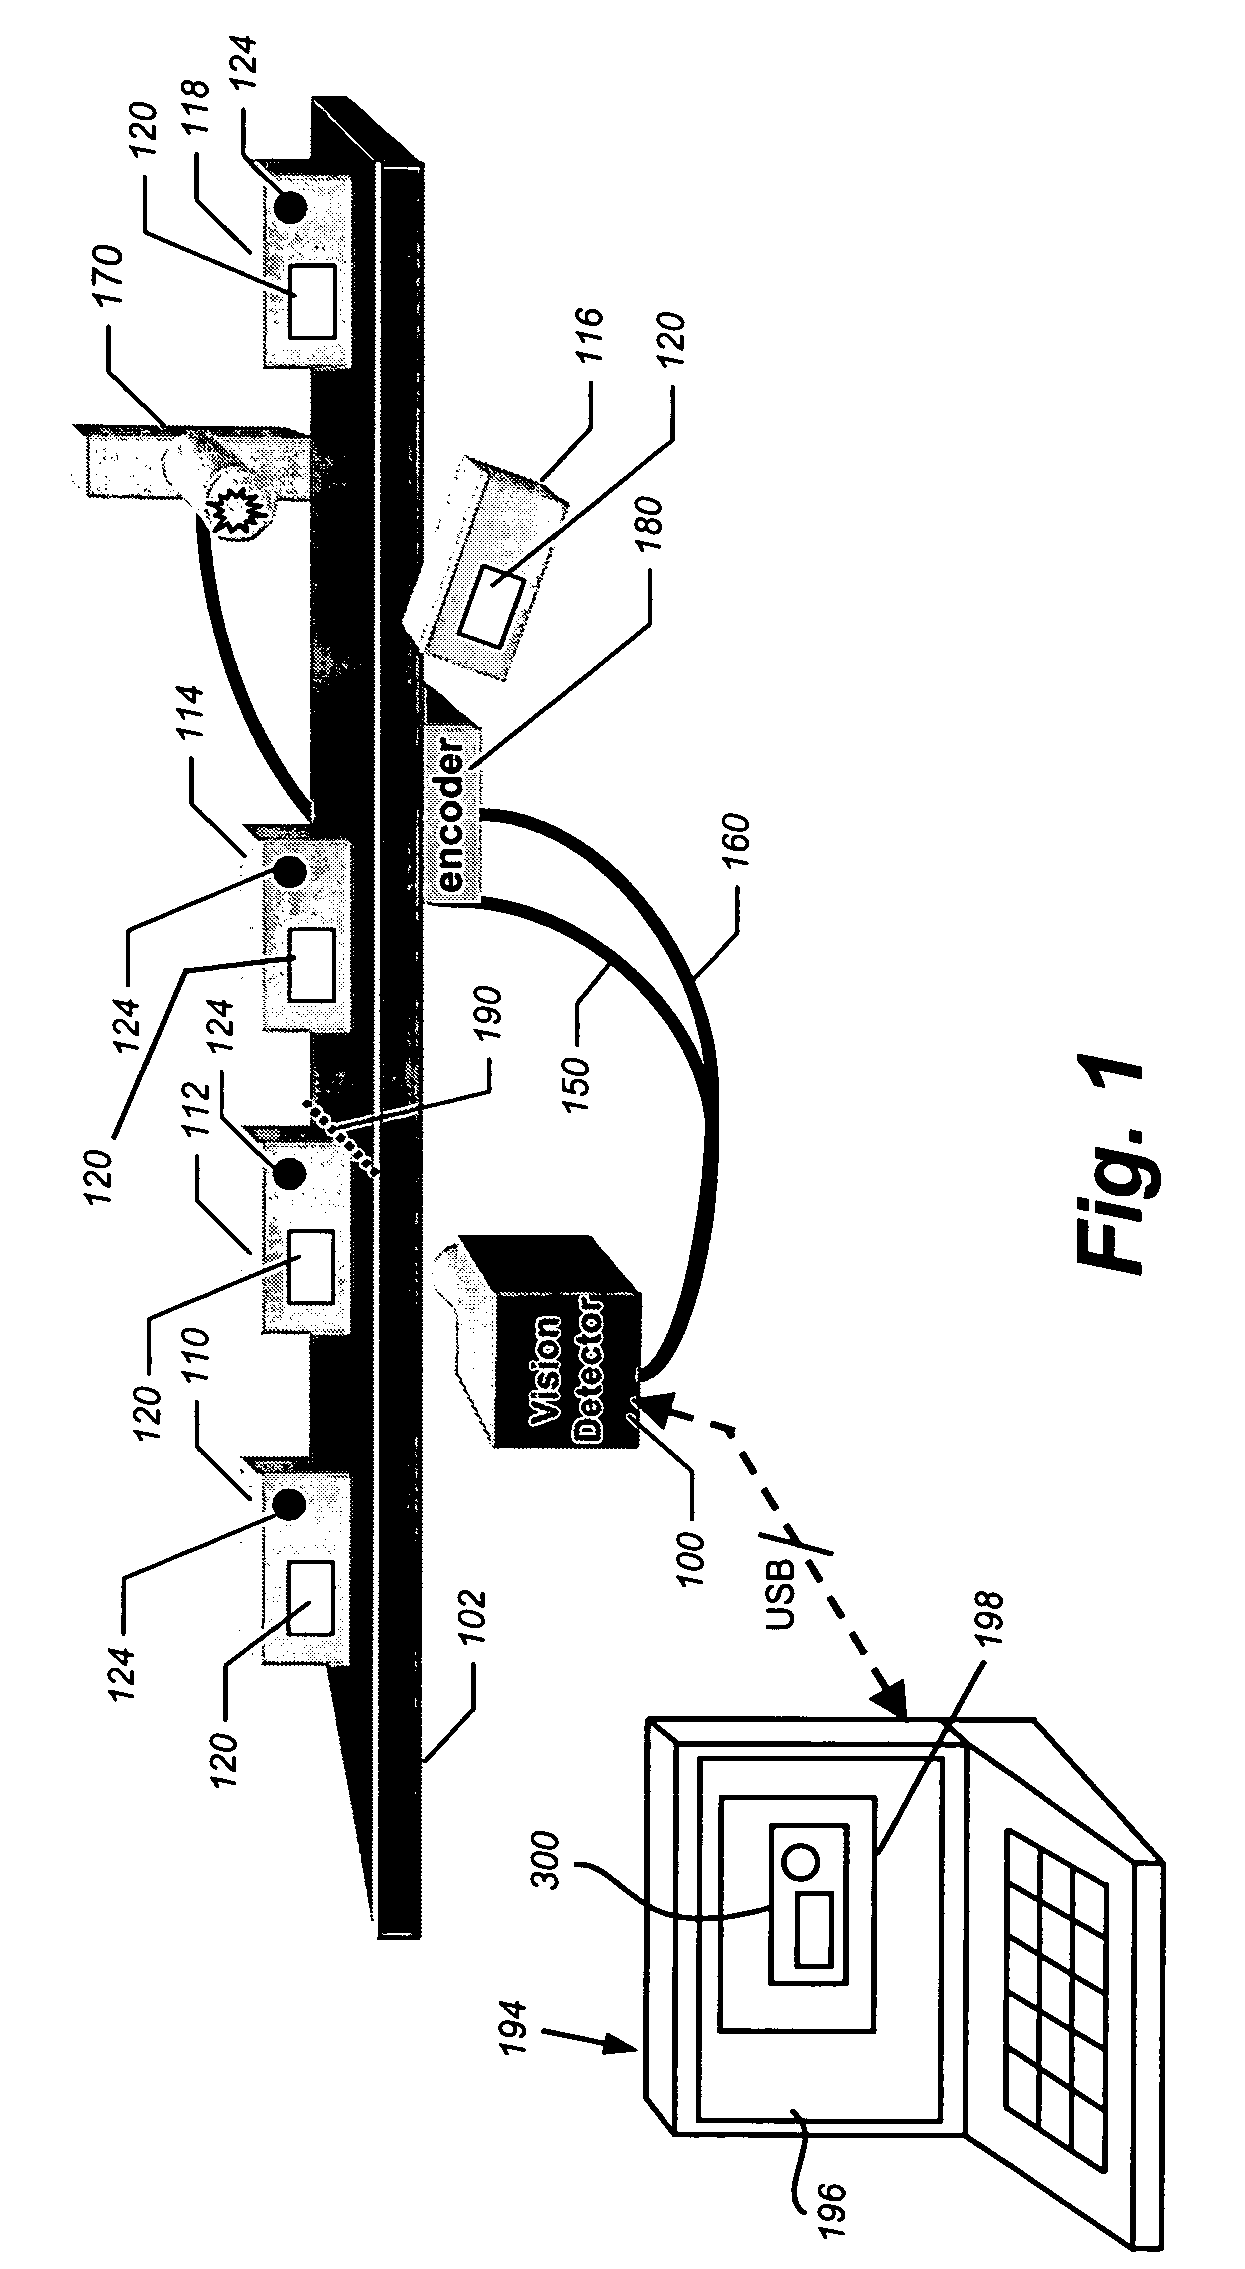 System and method for assigning analysis parameters to vision detector using a graphical interface